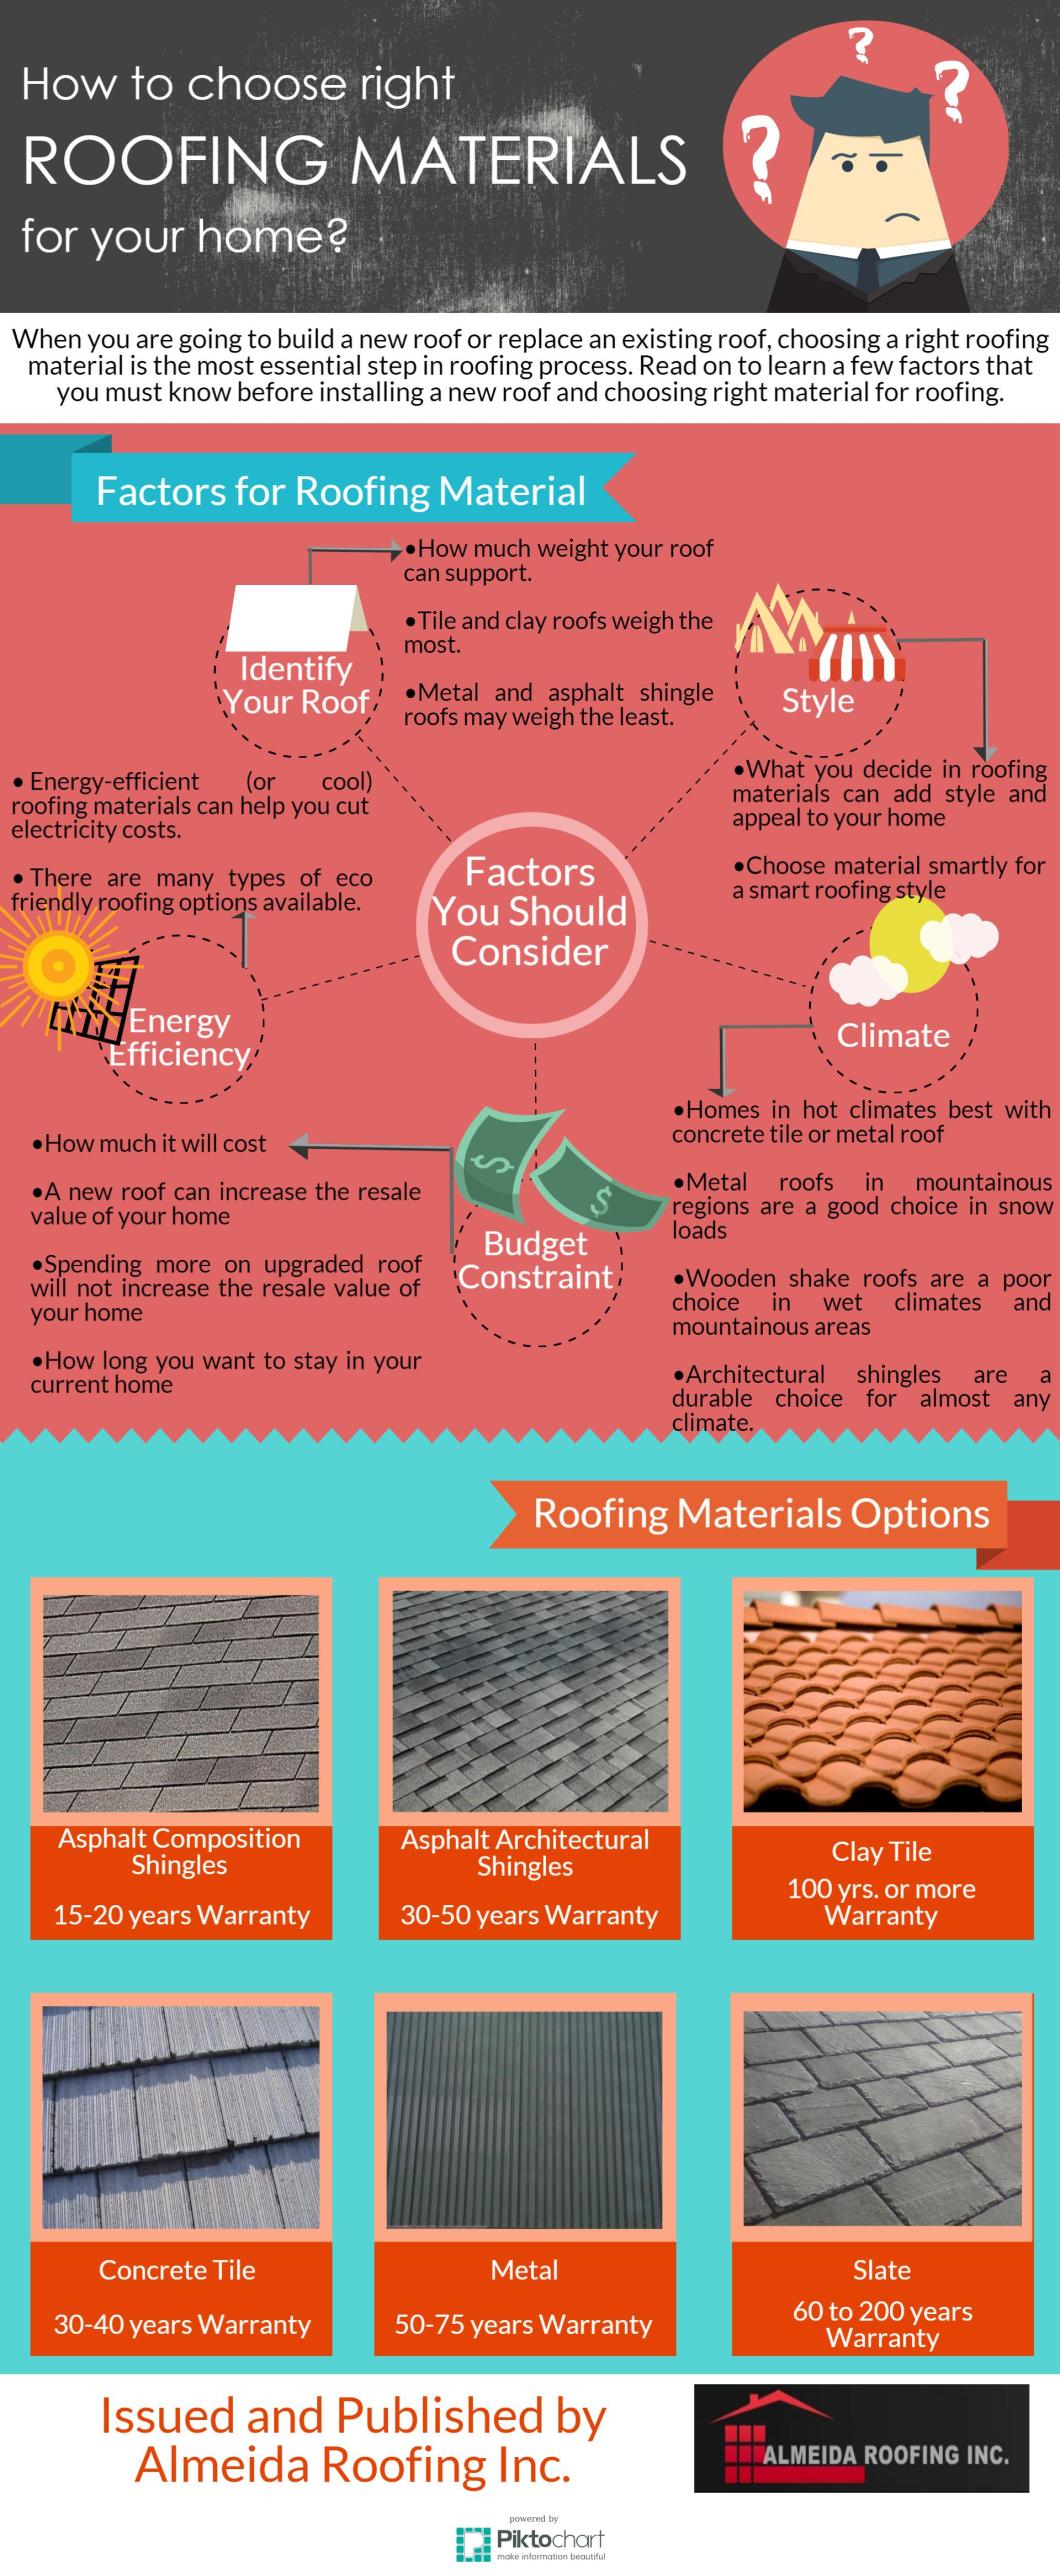 How to choose right roofing material